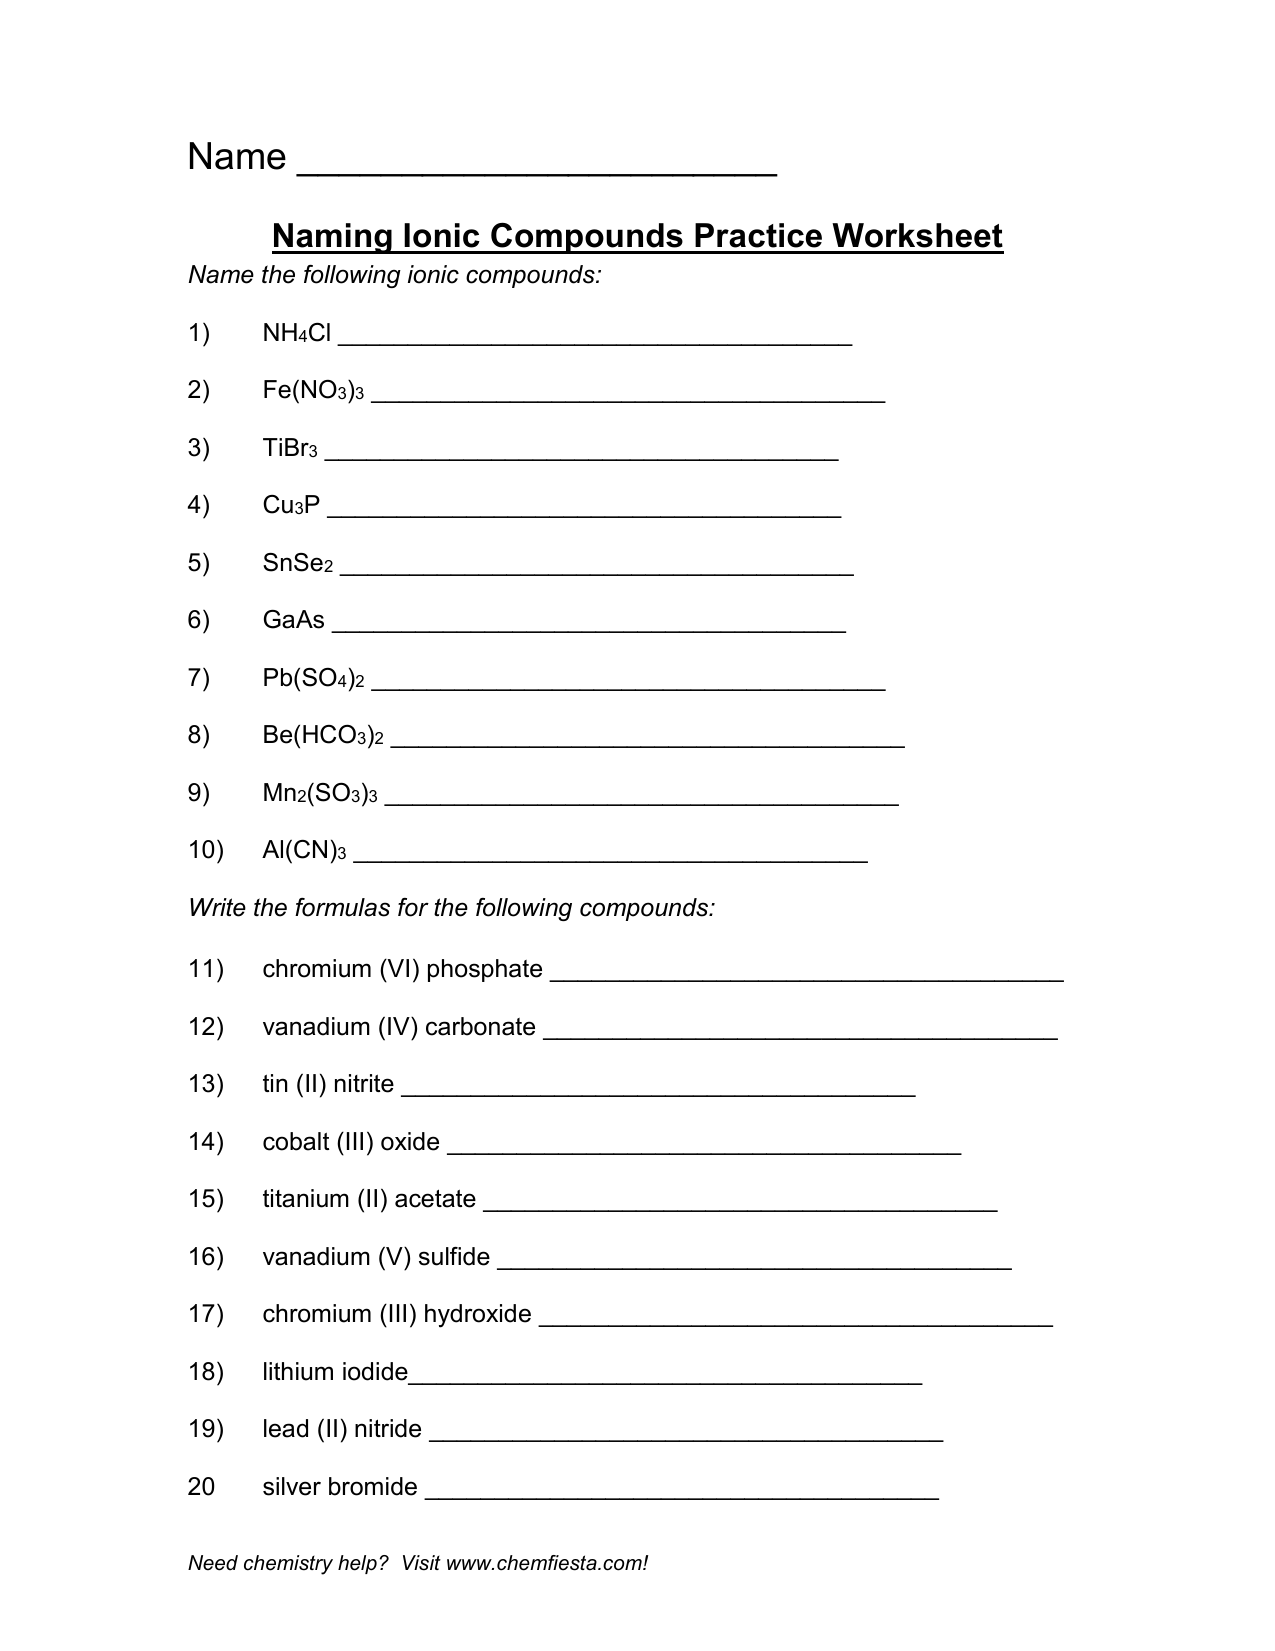 Mixed Ionic/Covalent Compound Naming Regarding Naming Compounds Practice Worksheet